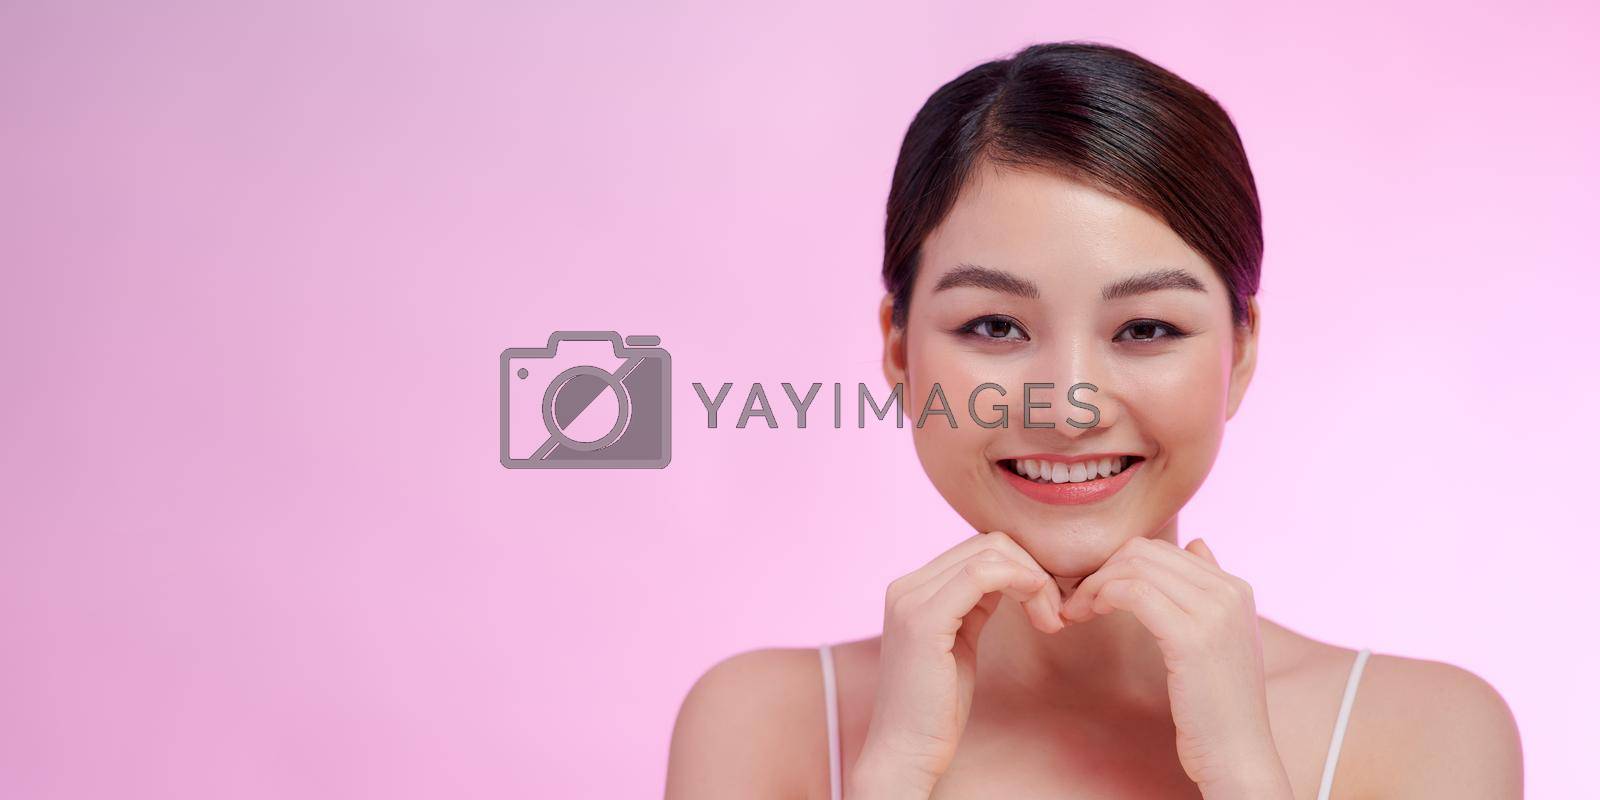 Beauty asian woman with perfect makeup.